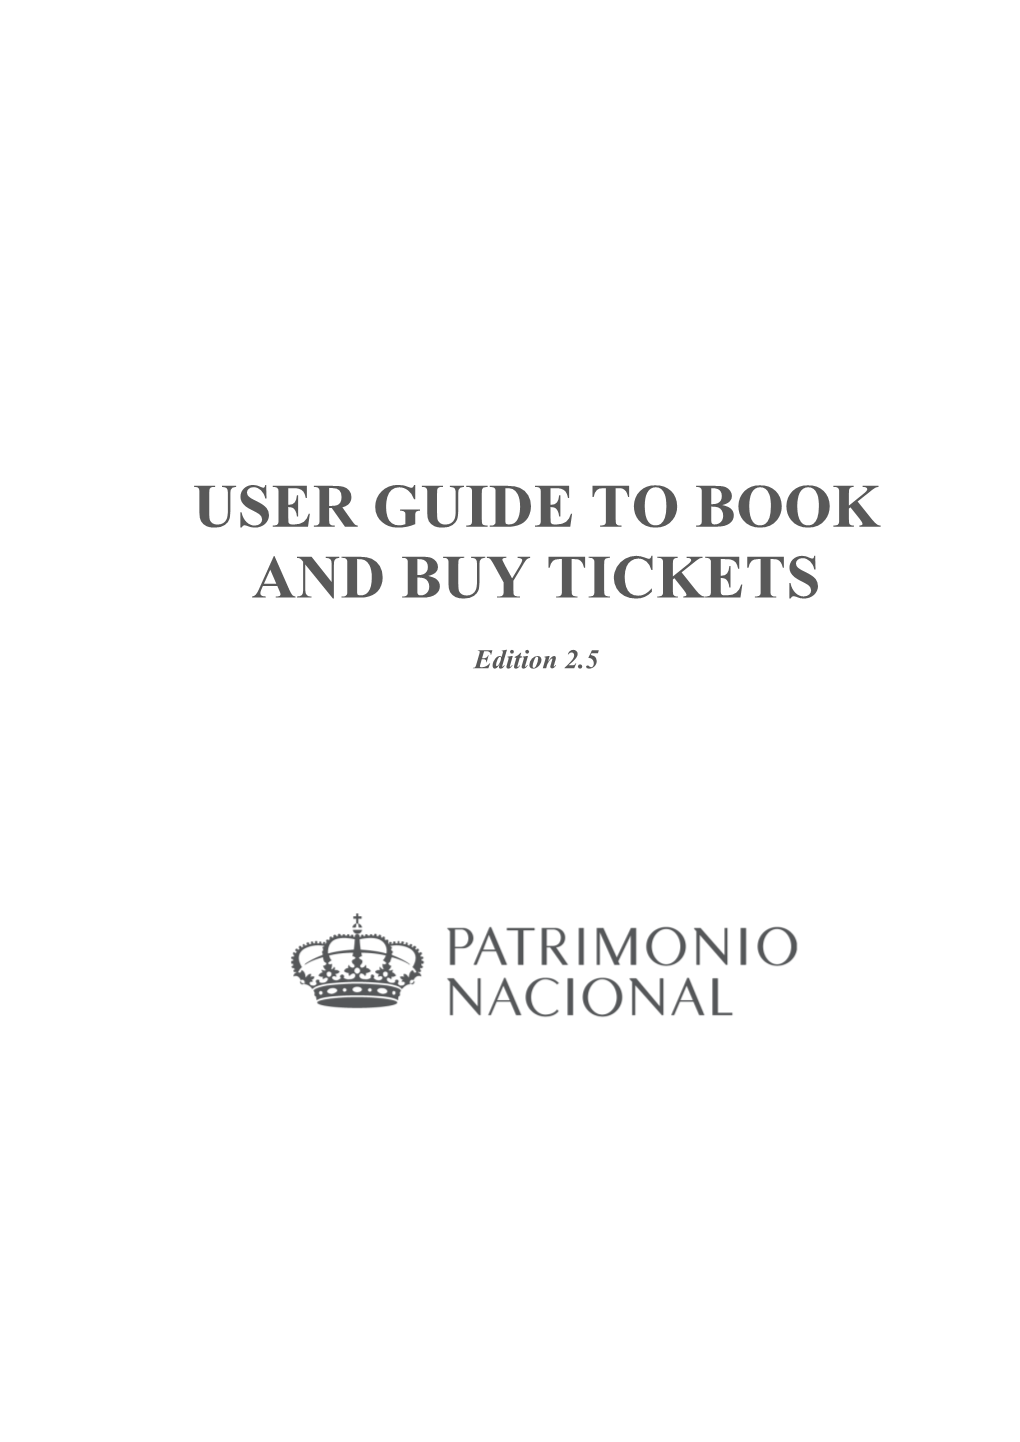 User Guide to Book and Buy Tickets